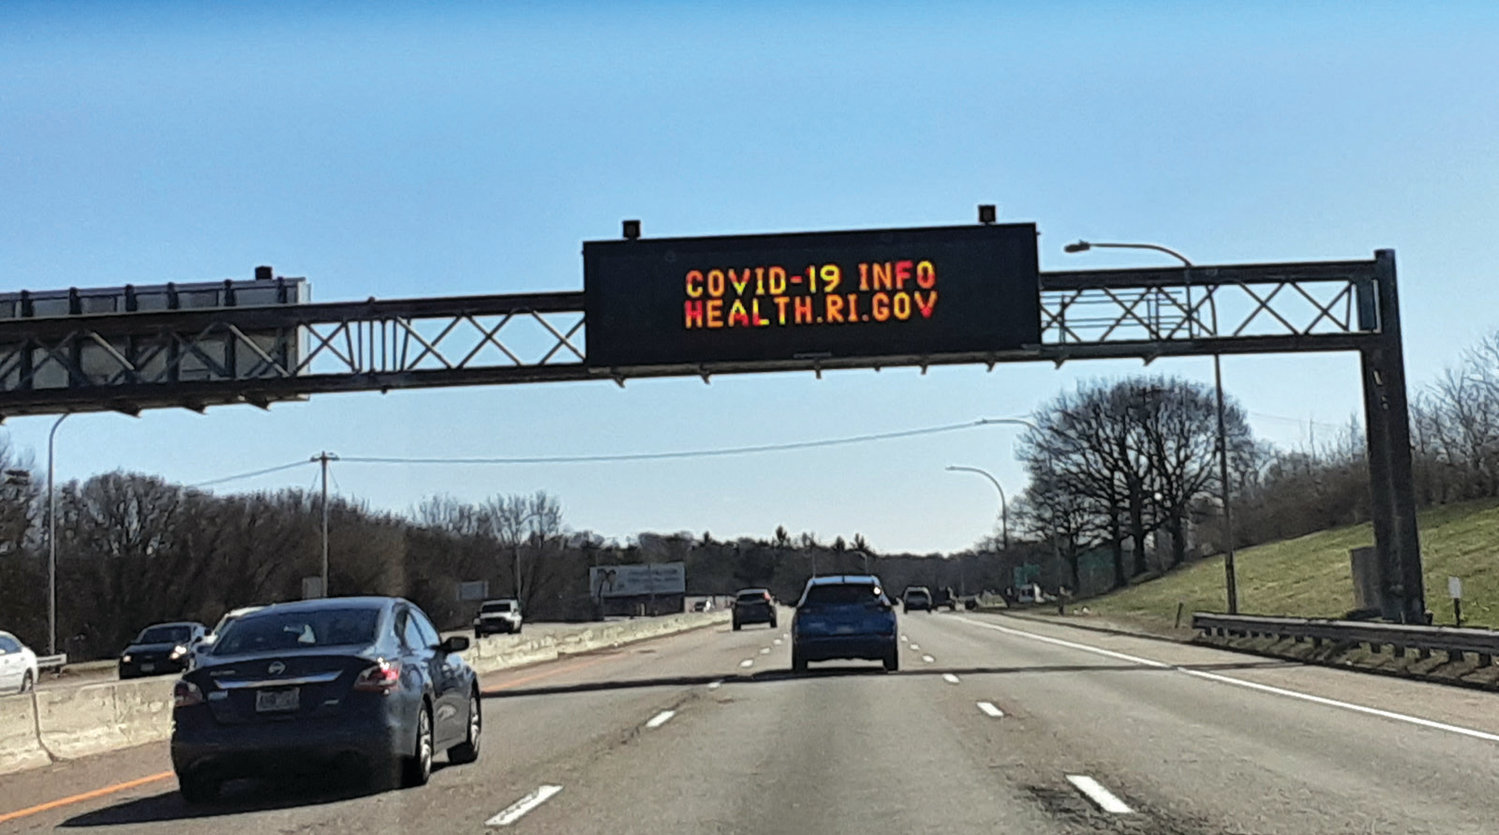 SIGN OF THE TIMES: An I-95 billboard advising of COVID-19 information caught Jen Cowart by surprise as the family traveled to move one of their daughters out of college on Sunday.